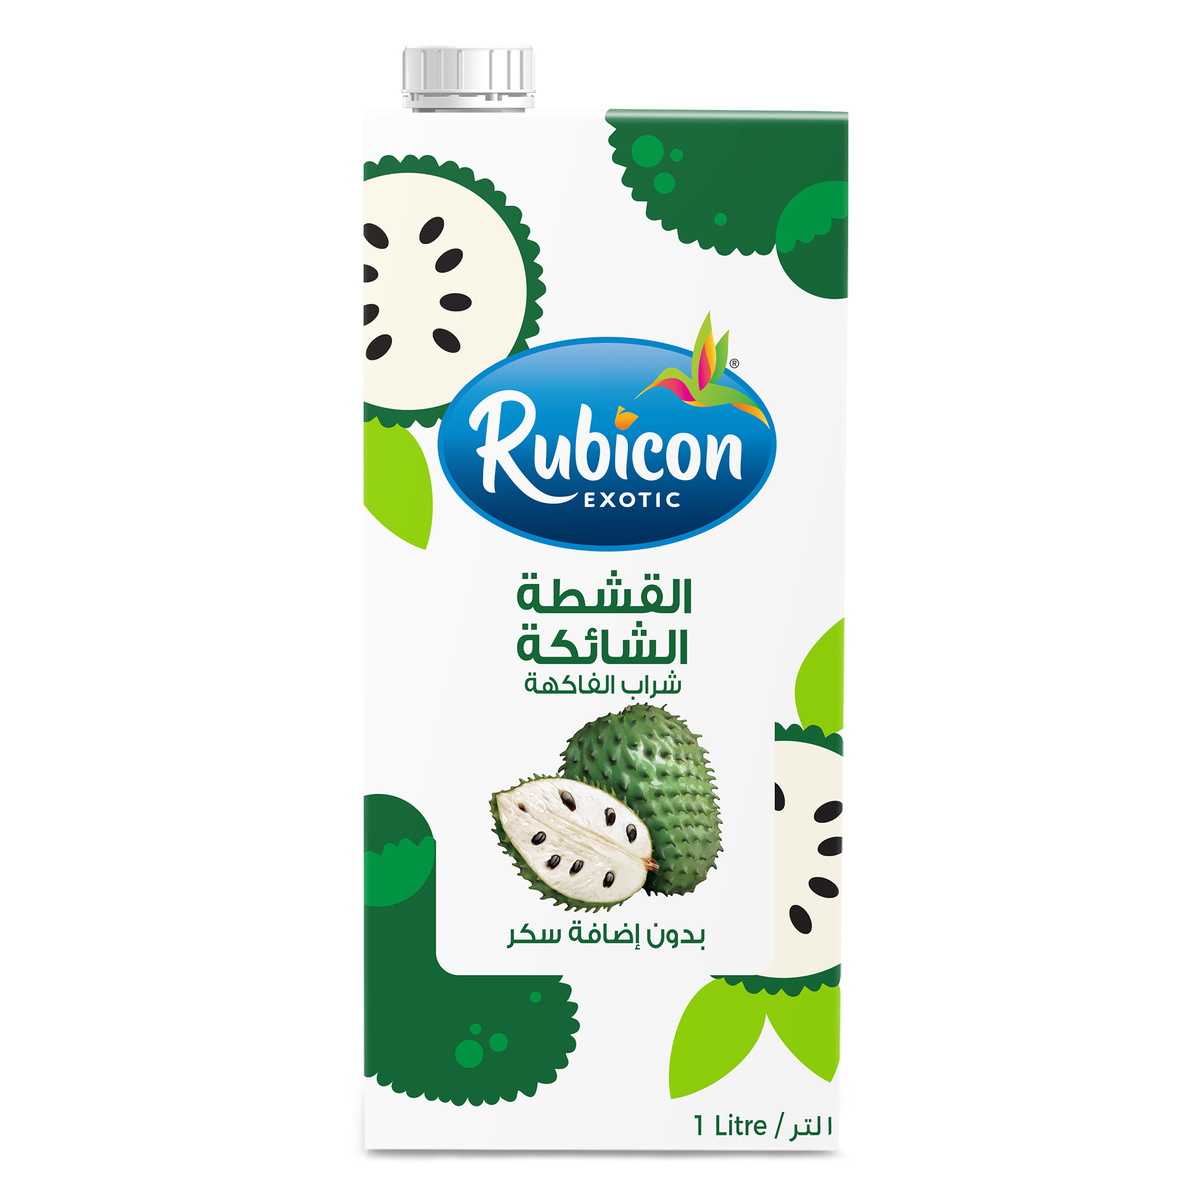 Rubicon Exotic No Added Sugar Guanabana Soursop Fruit Drink 1 Litre